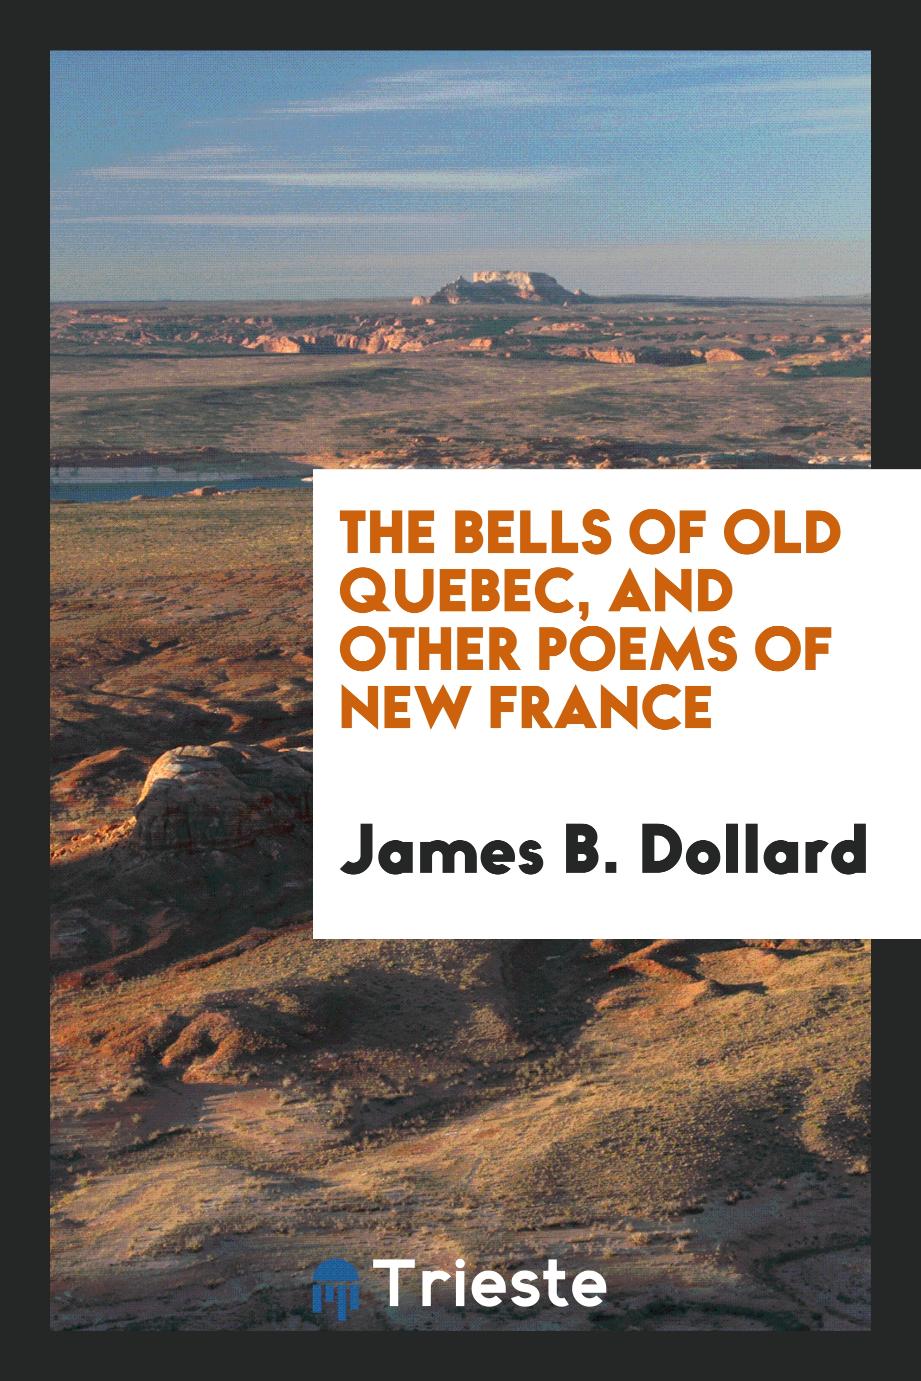 The bells of old Quebec, and other poems of New France